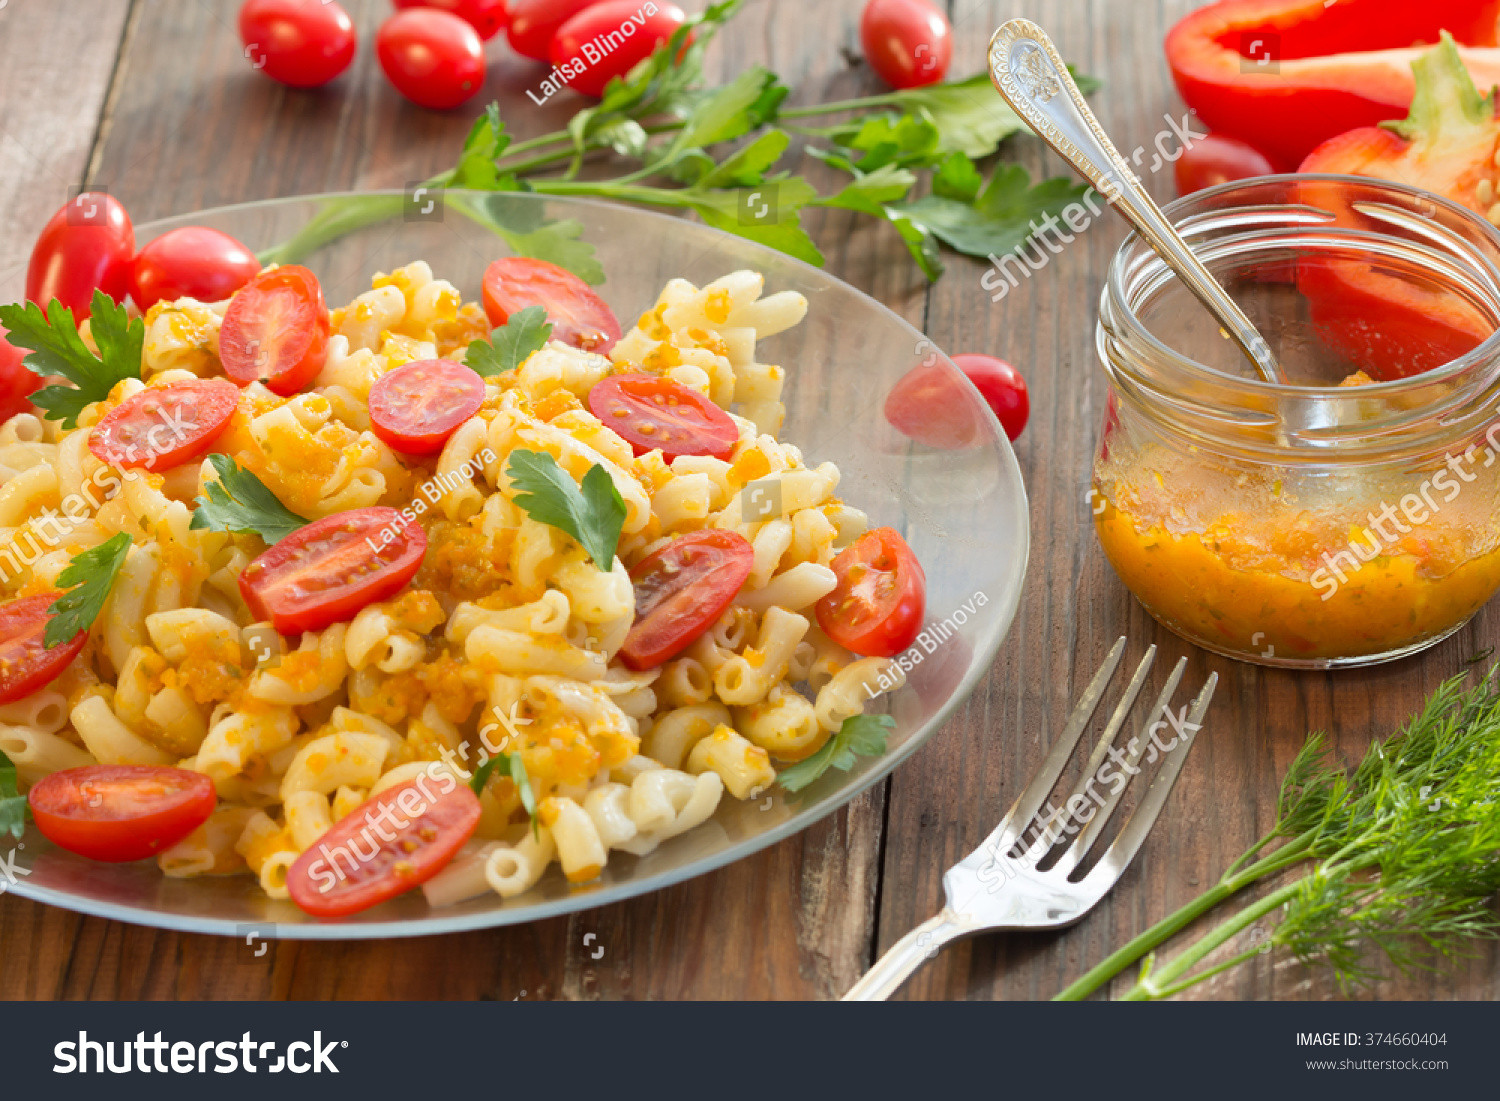 Healthy Sauces For Vegetables
 Macaroni Pasta Ve able Sauce Fresh Tomatoes Stock